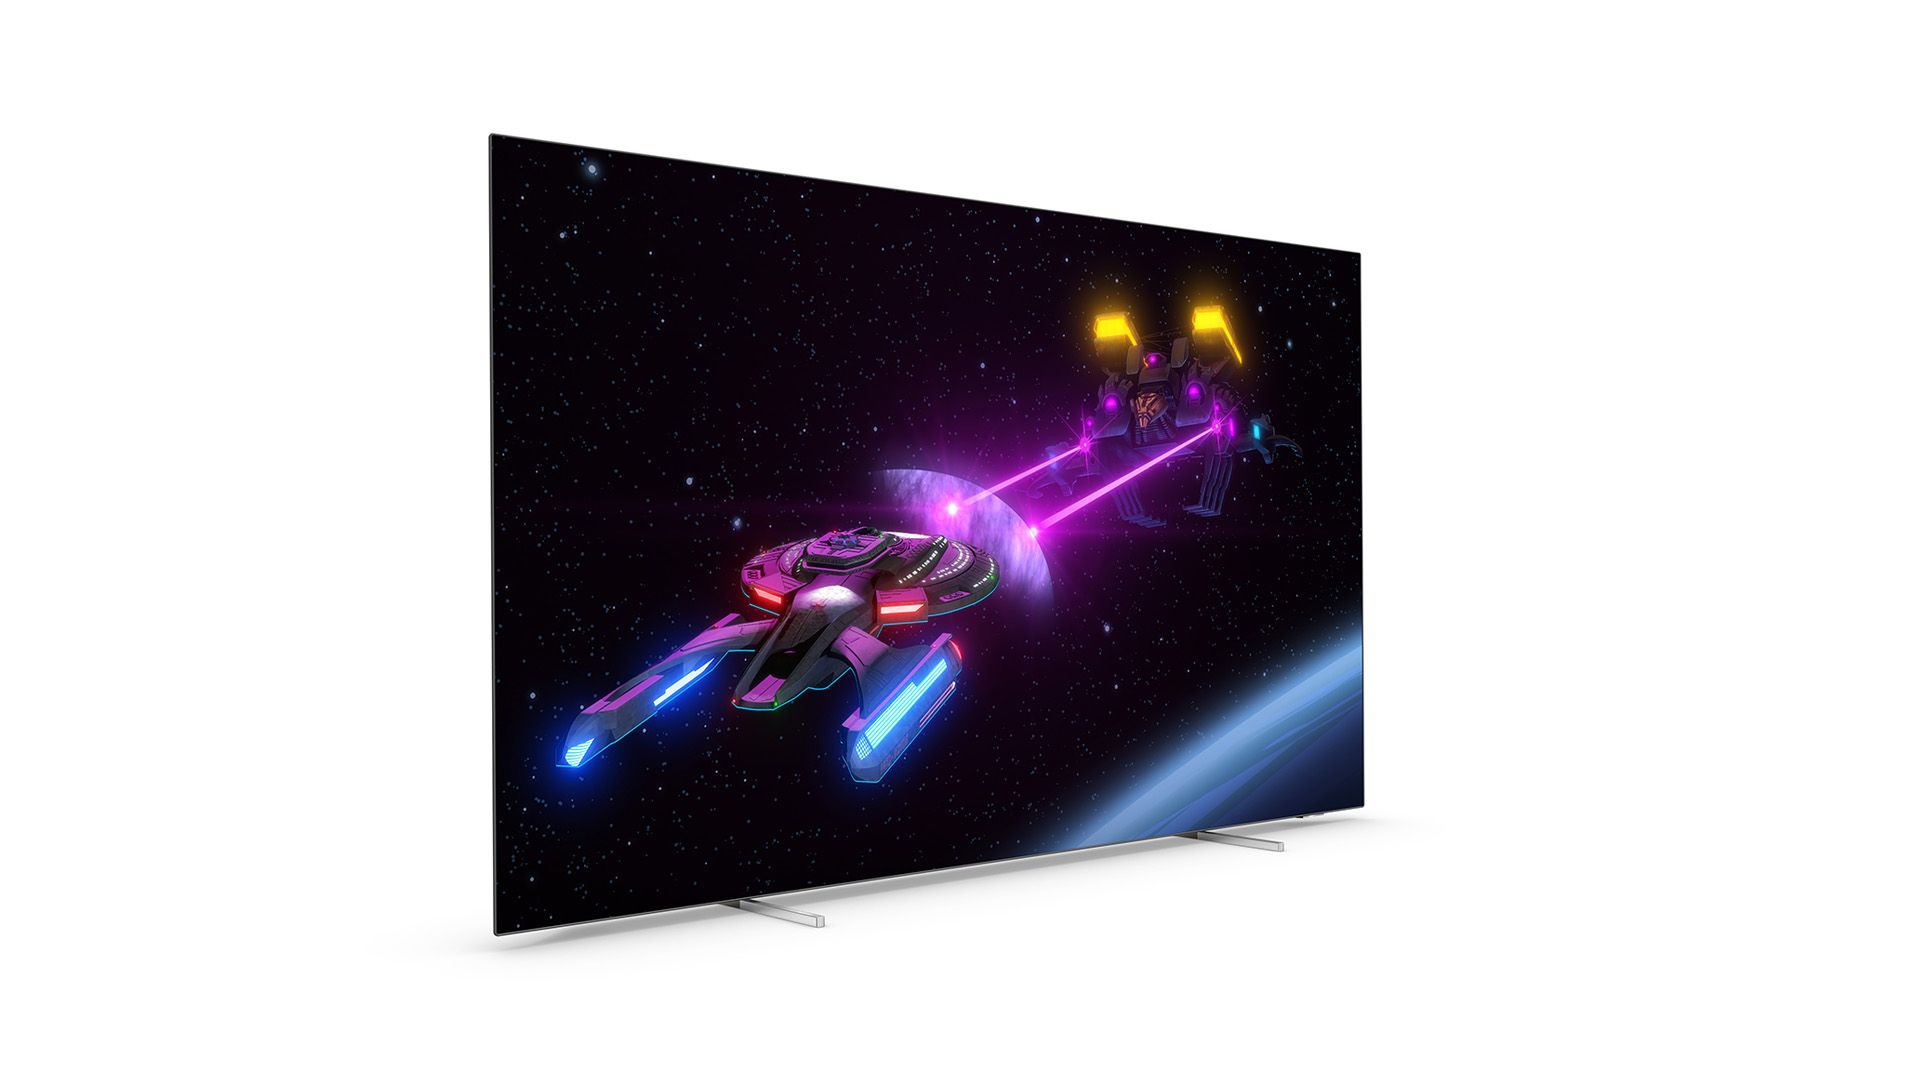 Philips 65OLED806 OLED TV review